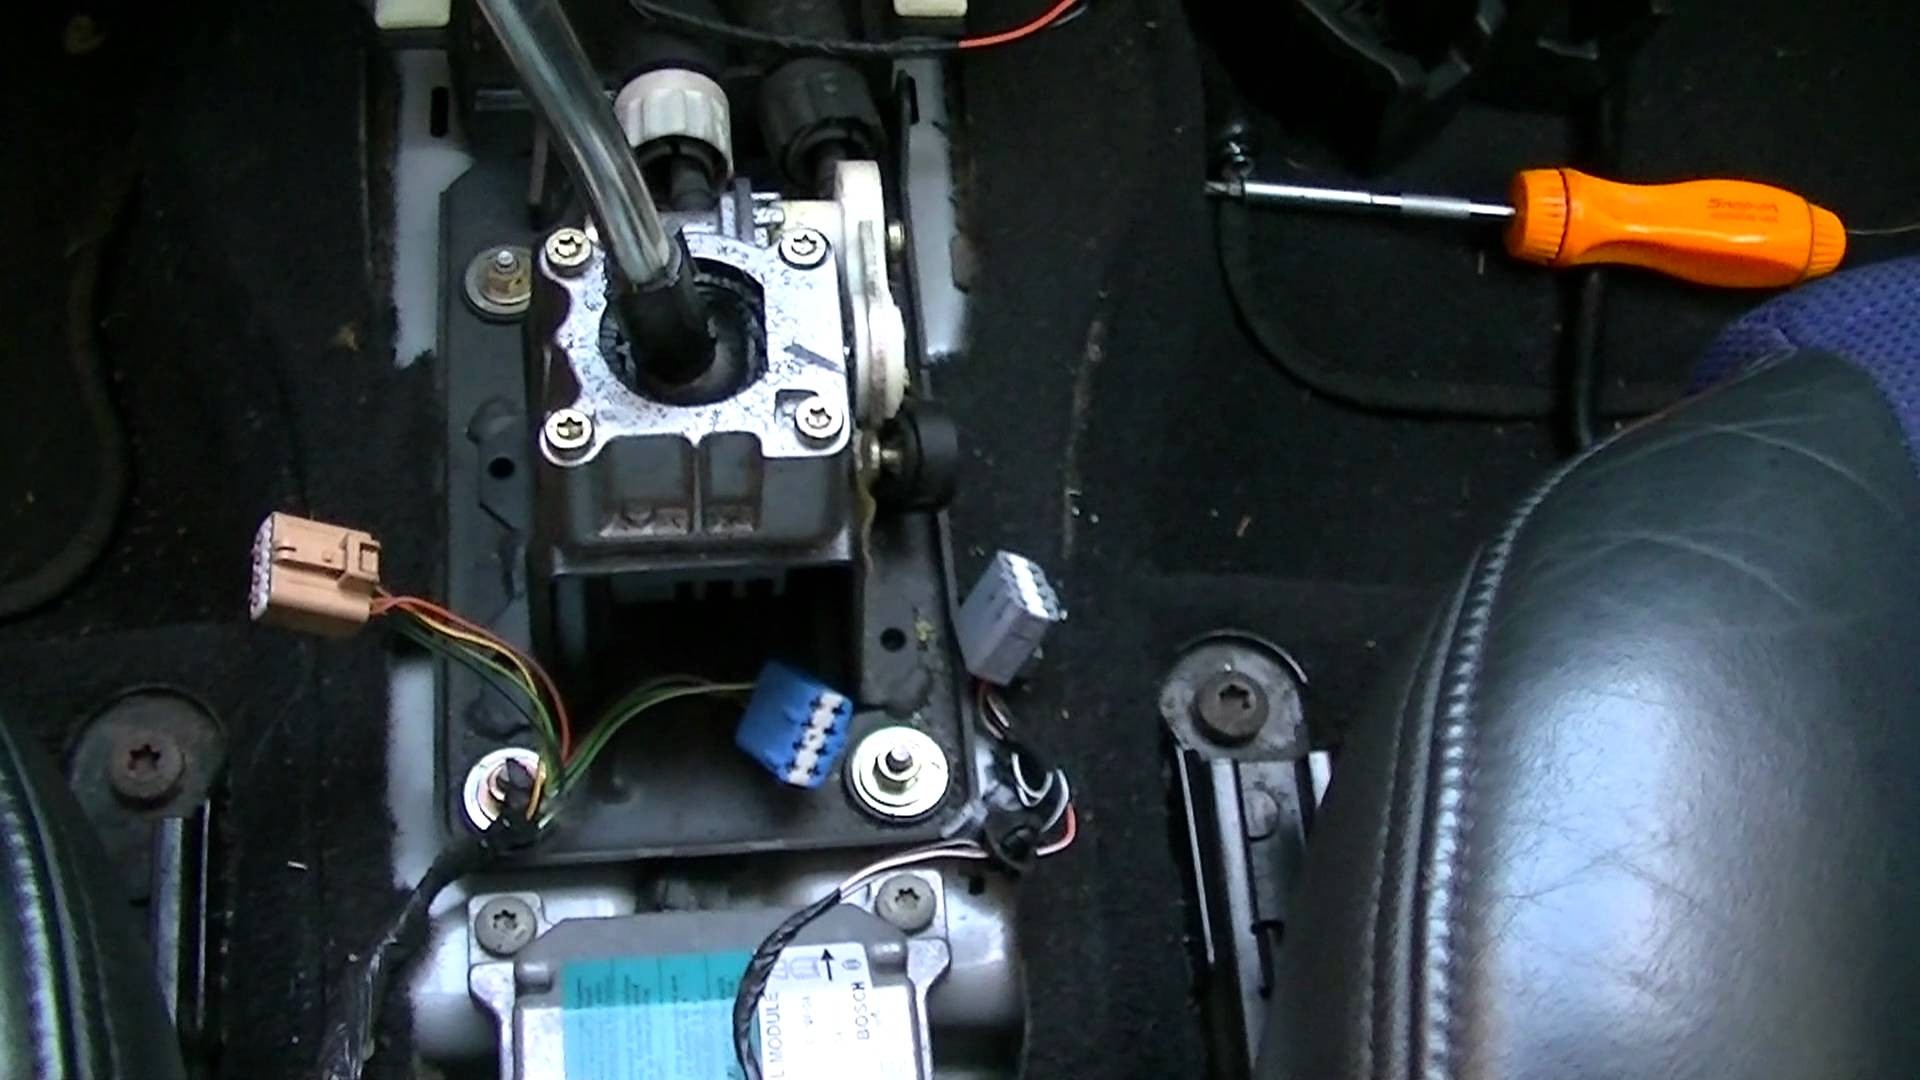 2006 ford Focus Engine Diagram Focus Shifter Cables Part 1 Of 2006 ford Focus Engine Diagram